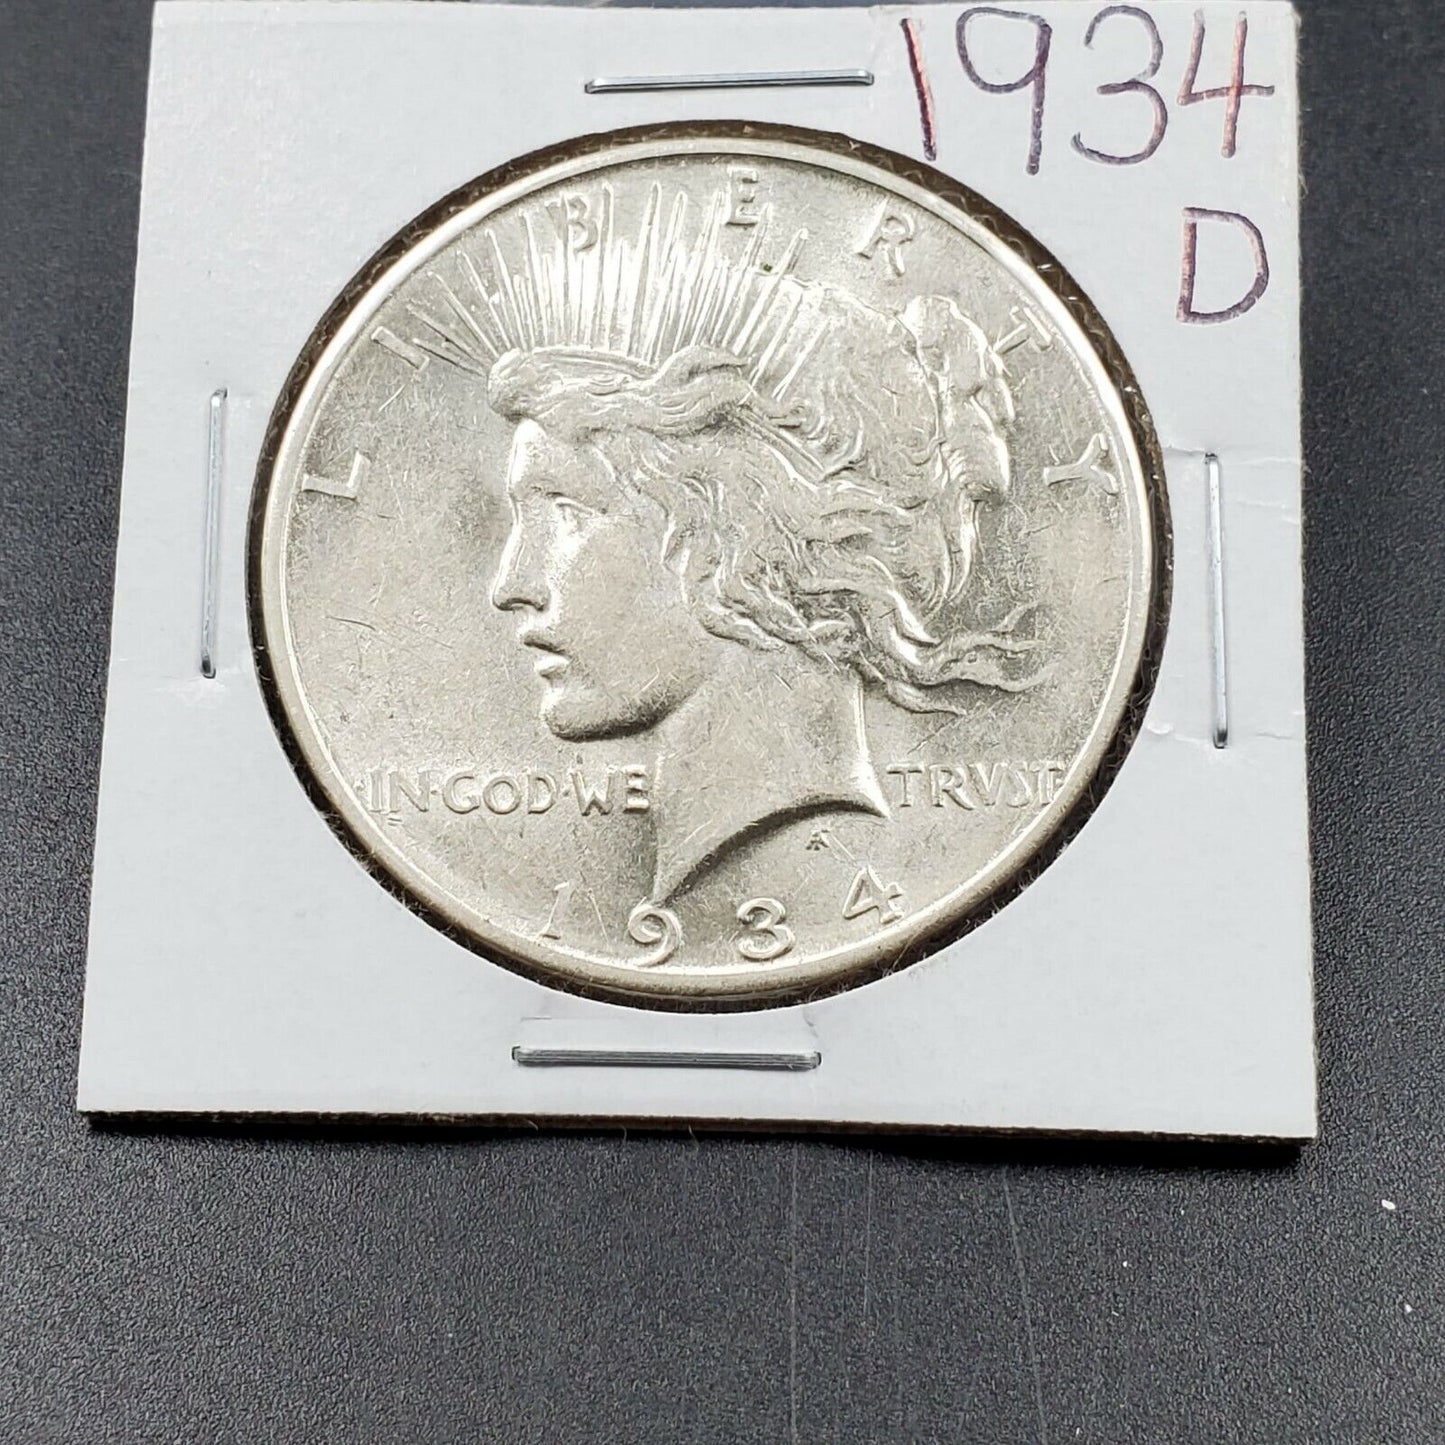 1934 D $1 Peace Silver Dollar AU About UNC Details Cleaned Nice Looking Coin